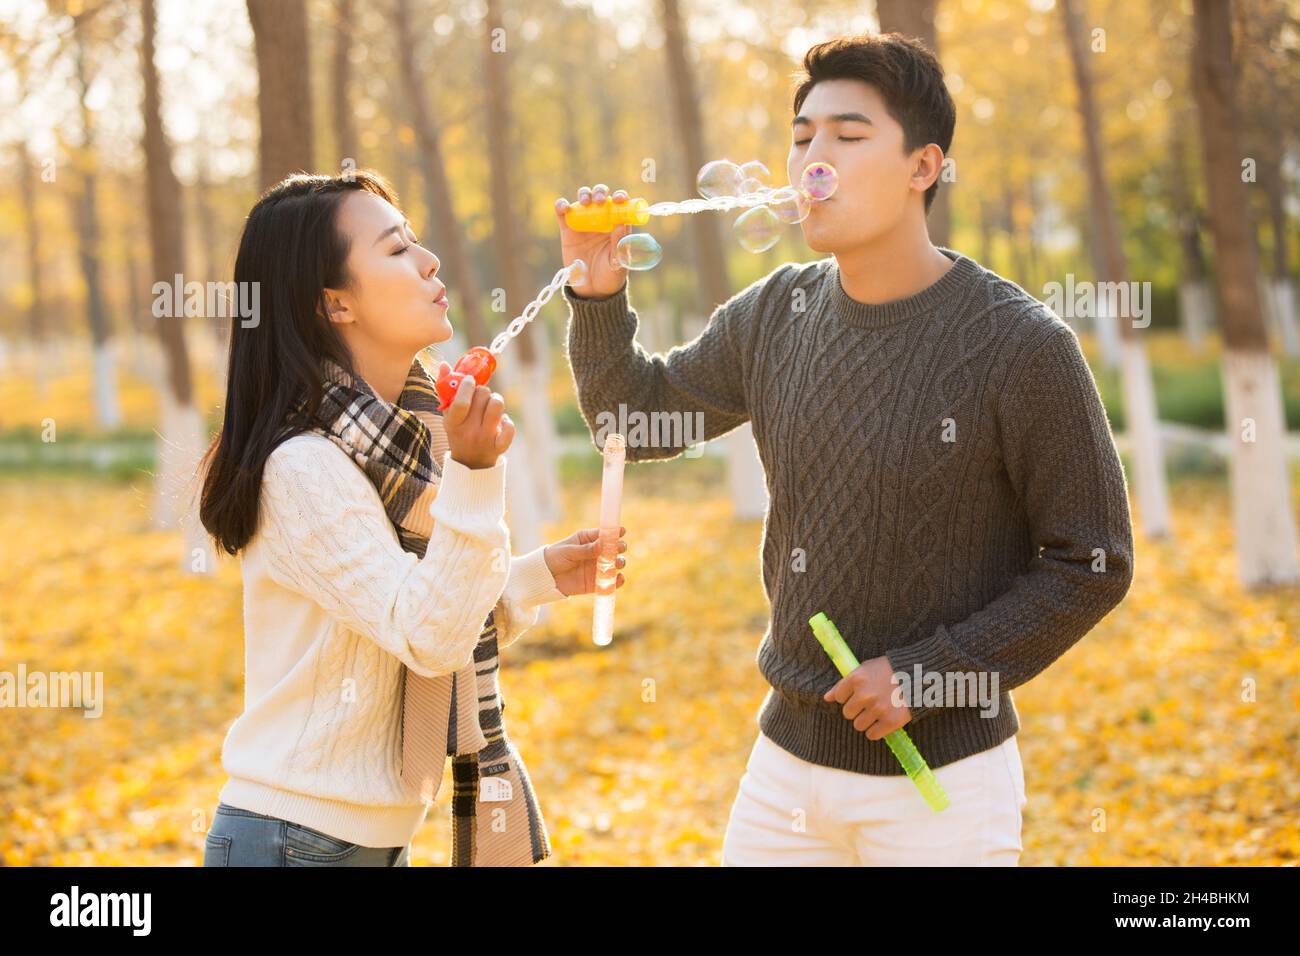 Happy young couple blowing bubbles Stock Photo